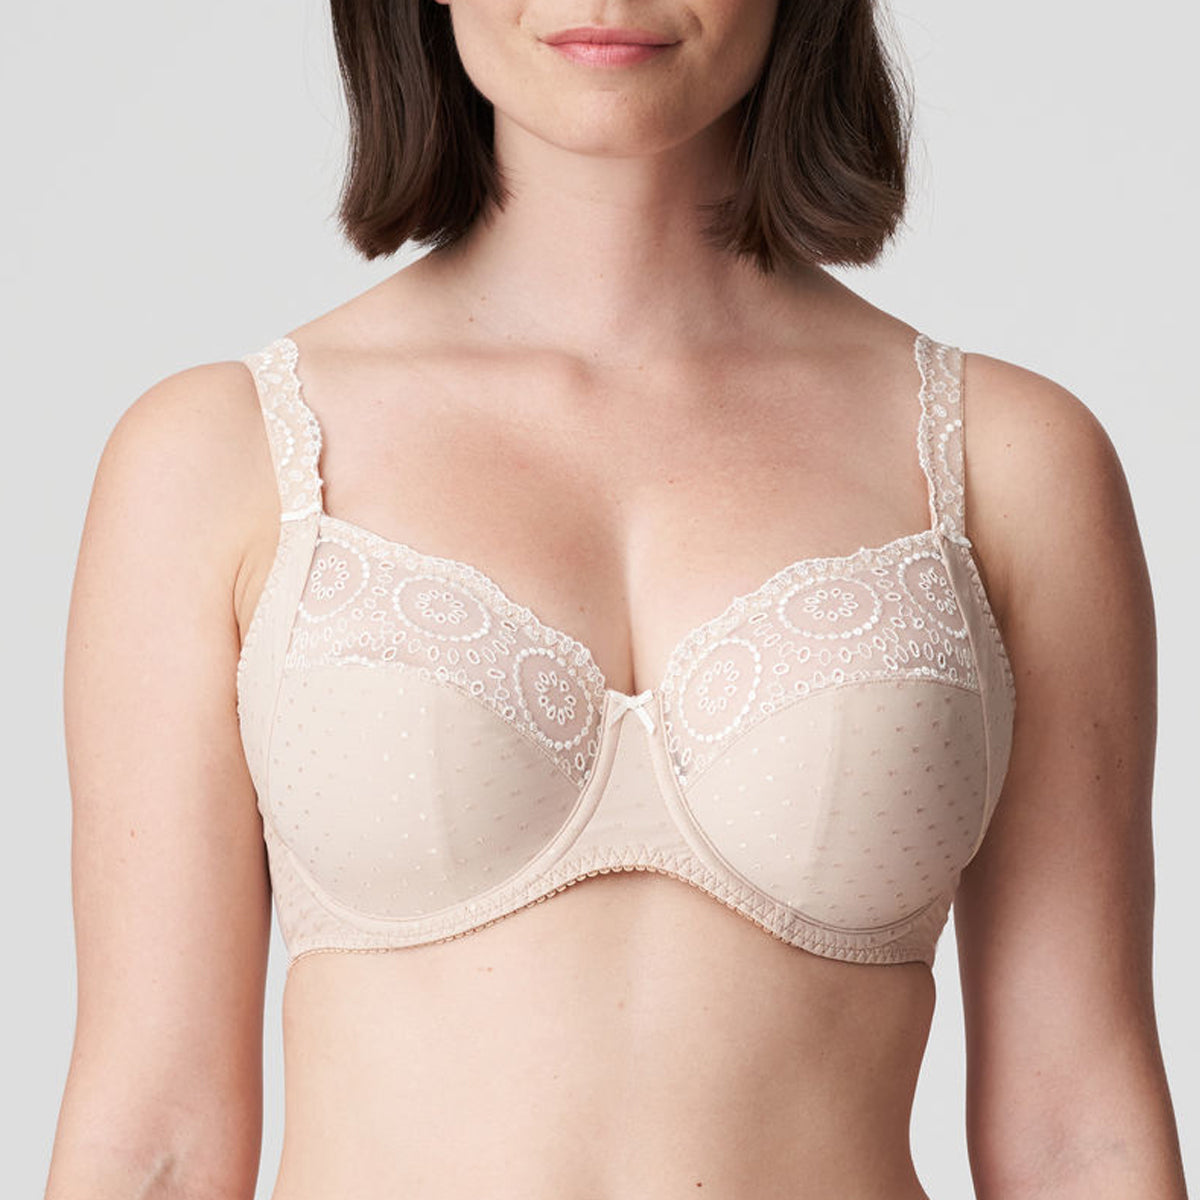 adviicd Bras For Women Full Coverage Underwire Demi Bra, Push-Up Bra with  Wonderbra Technology, Smoothing Lace-Trim Bra with Push-Up Cups Grey Large